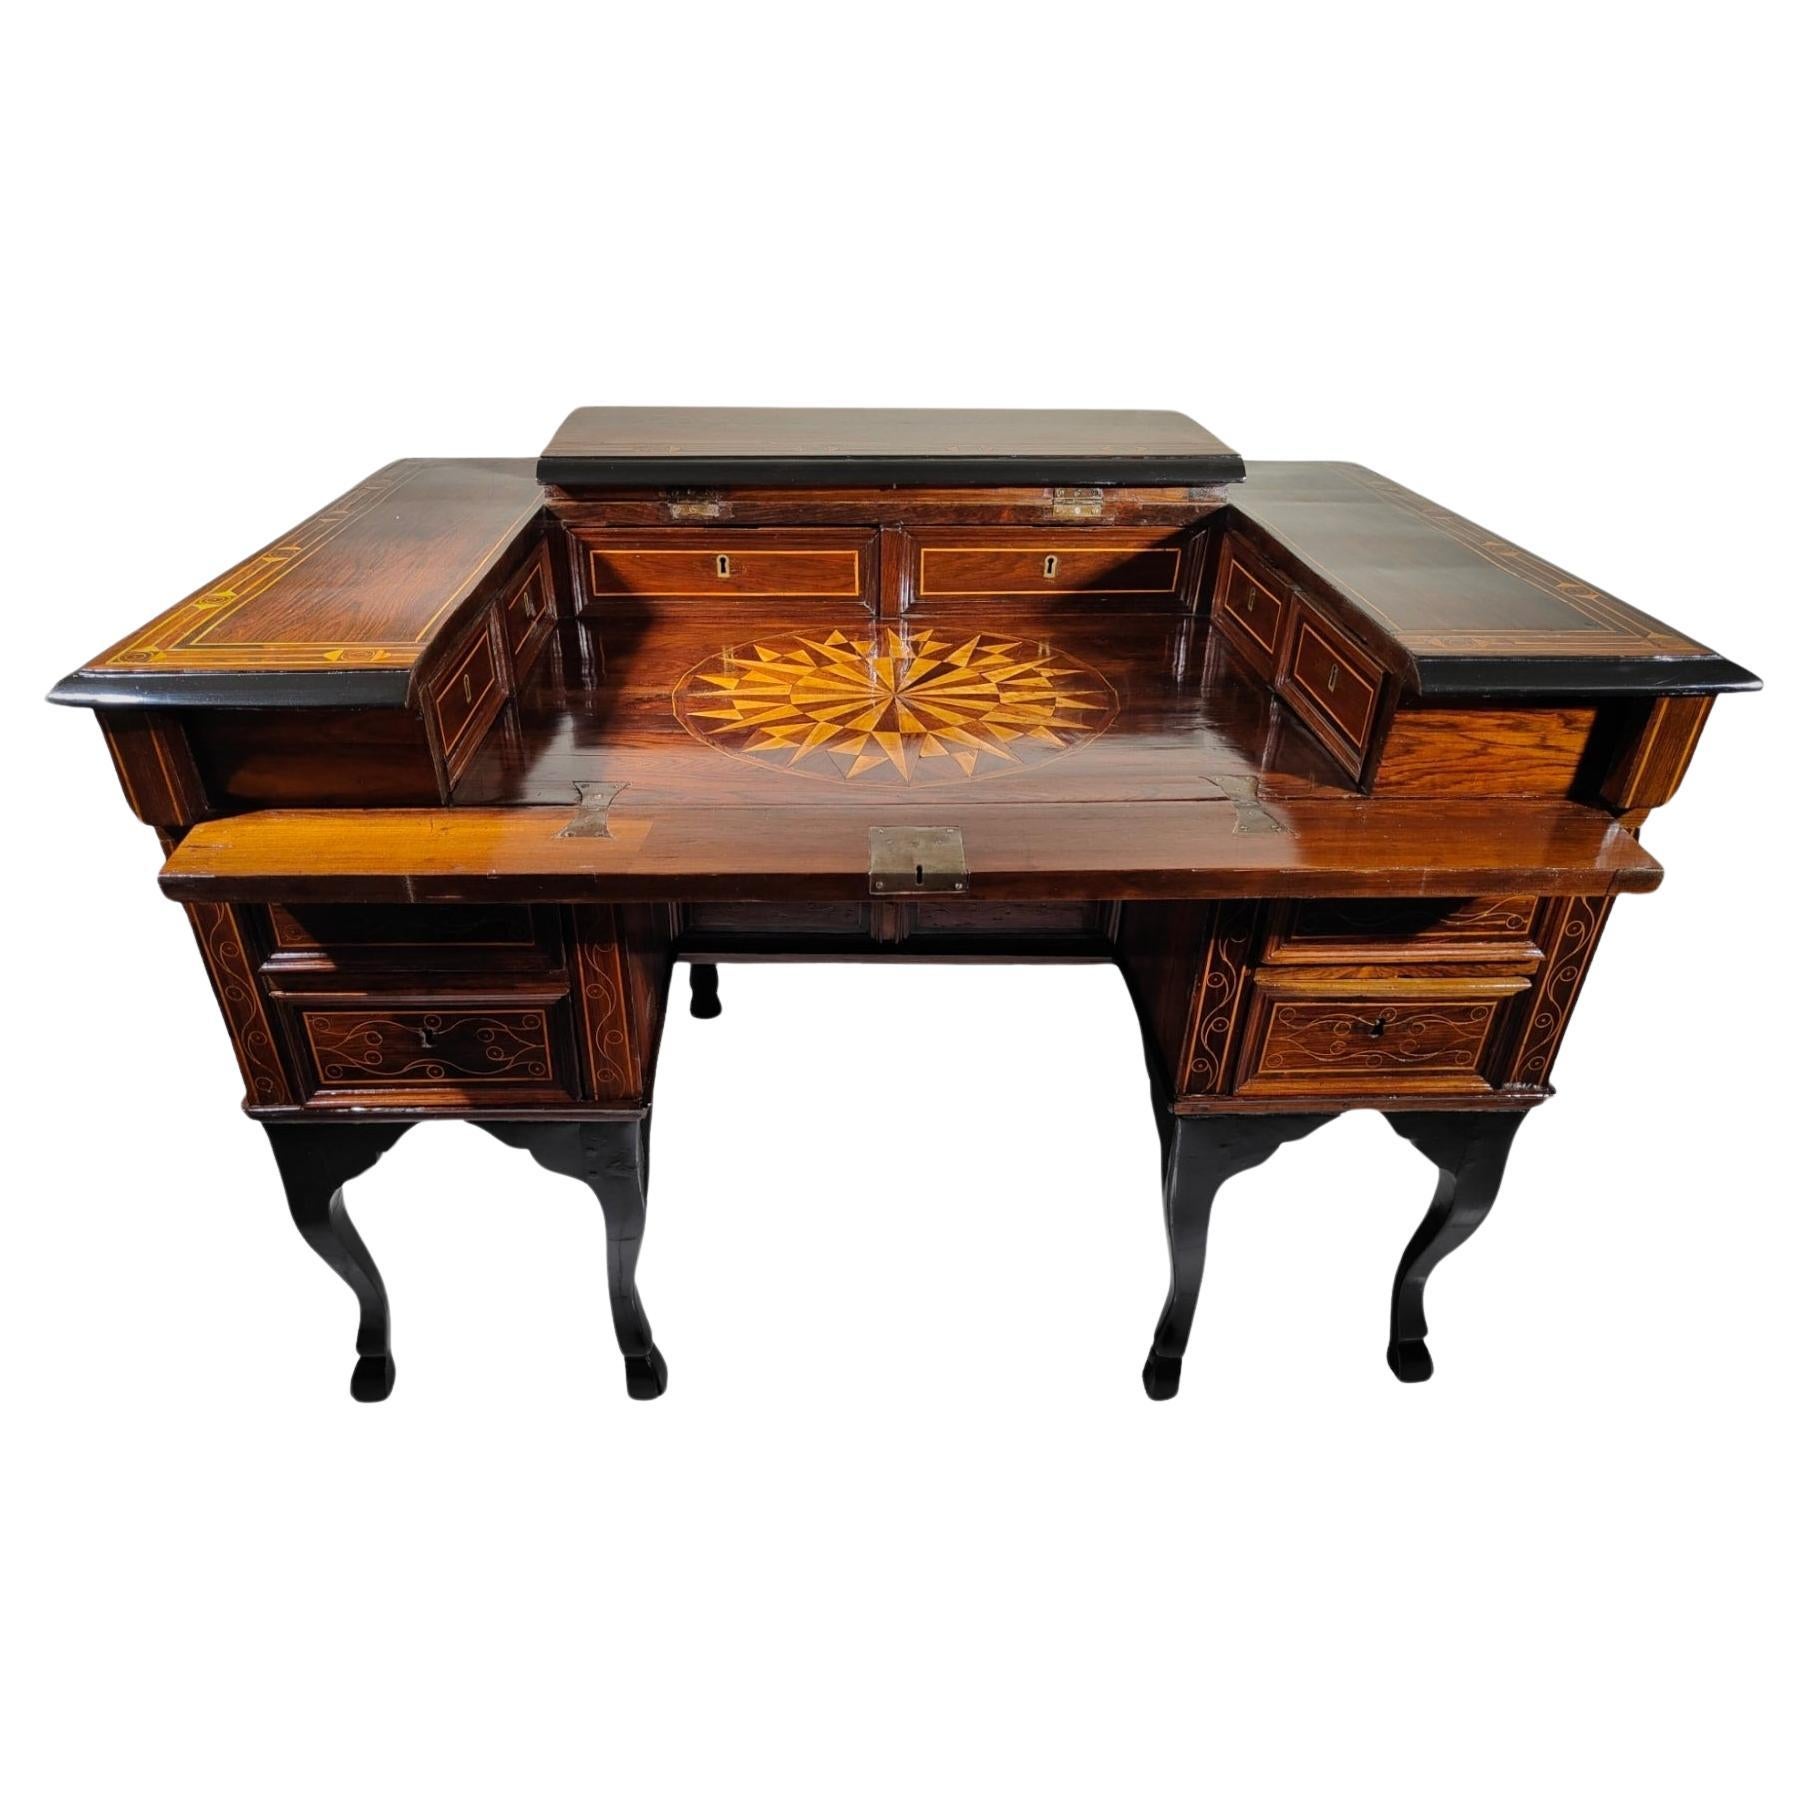 Philippe V Desk From the 17th Century For Sale